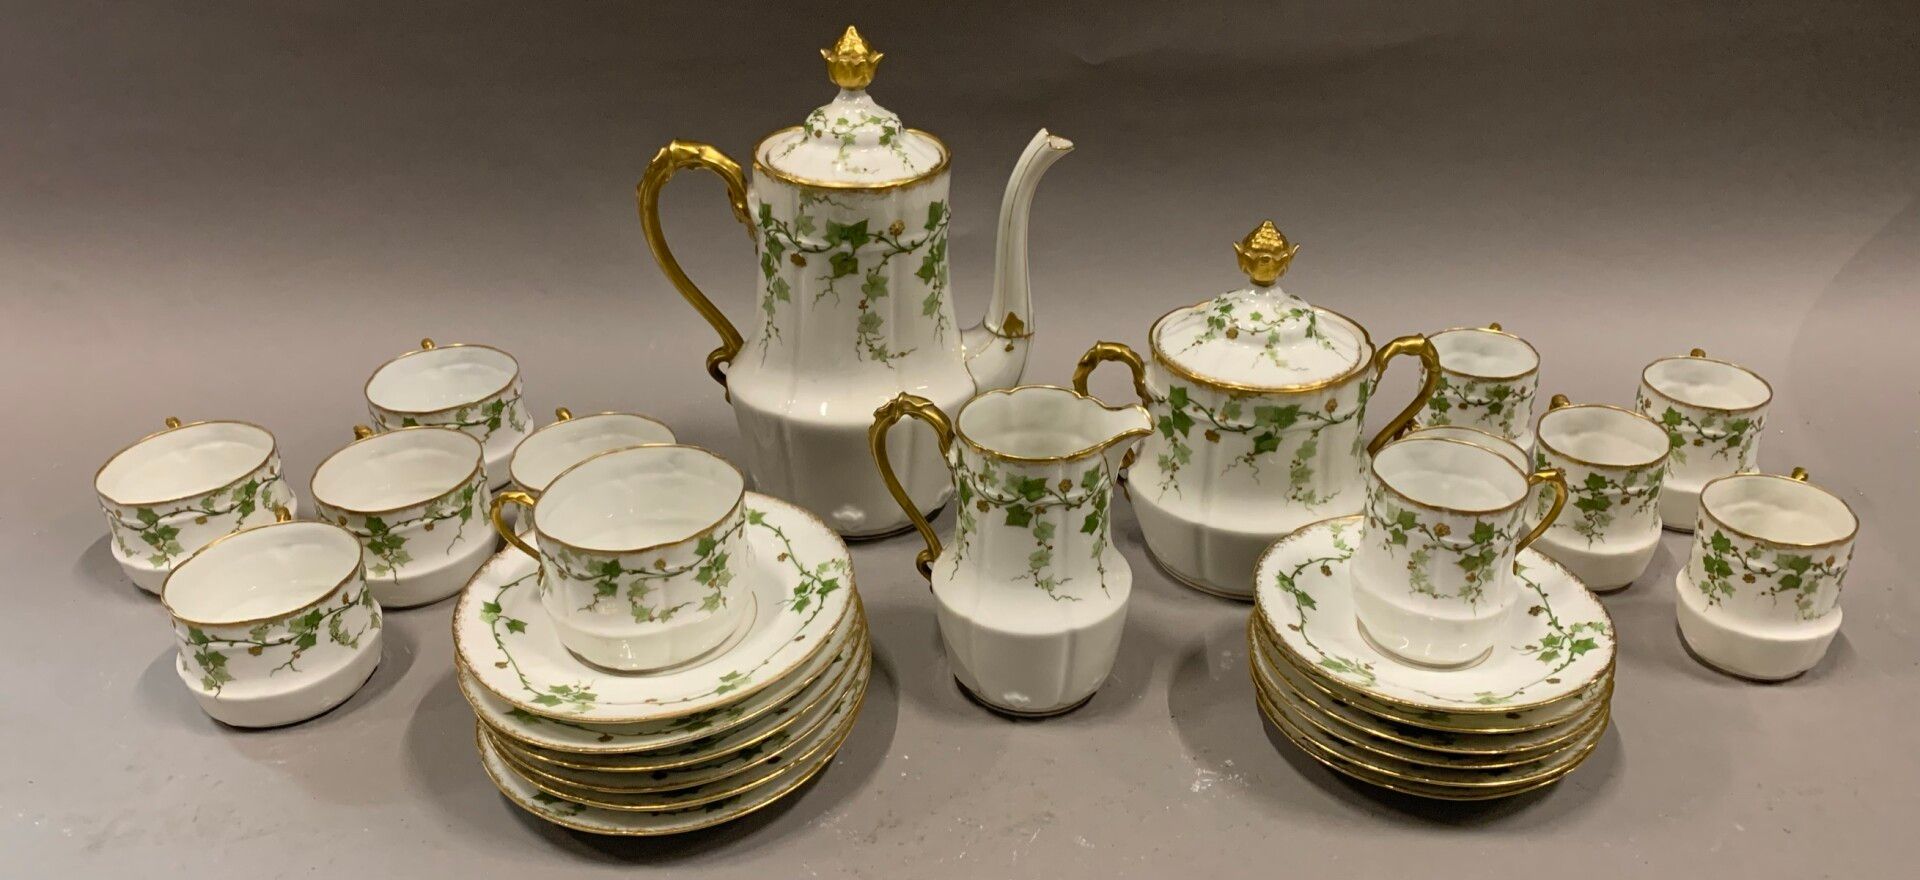 Null Porcelain tea and coffee set with ivy decoration.

Late 19th or early 20th &hellip;